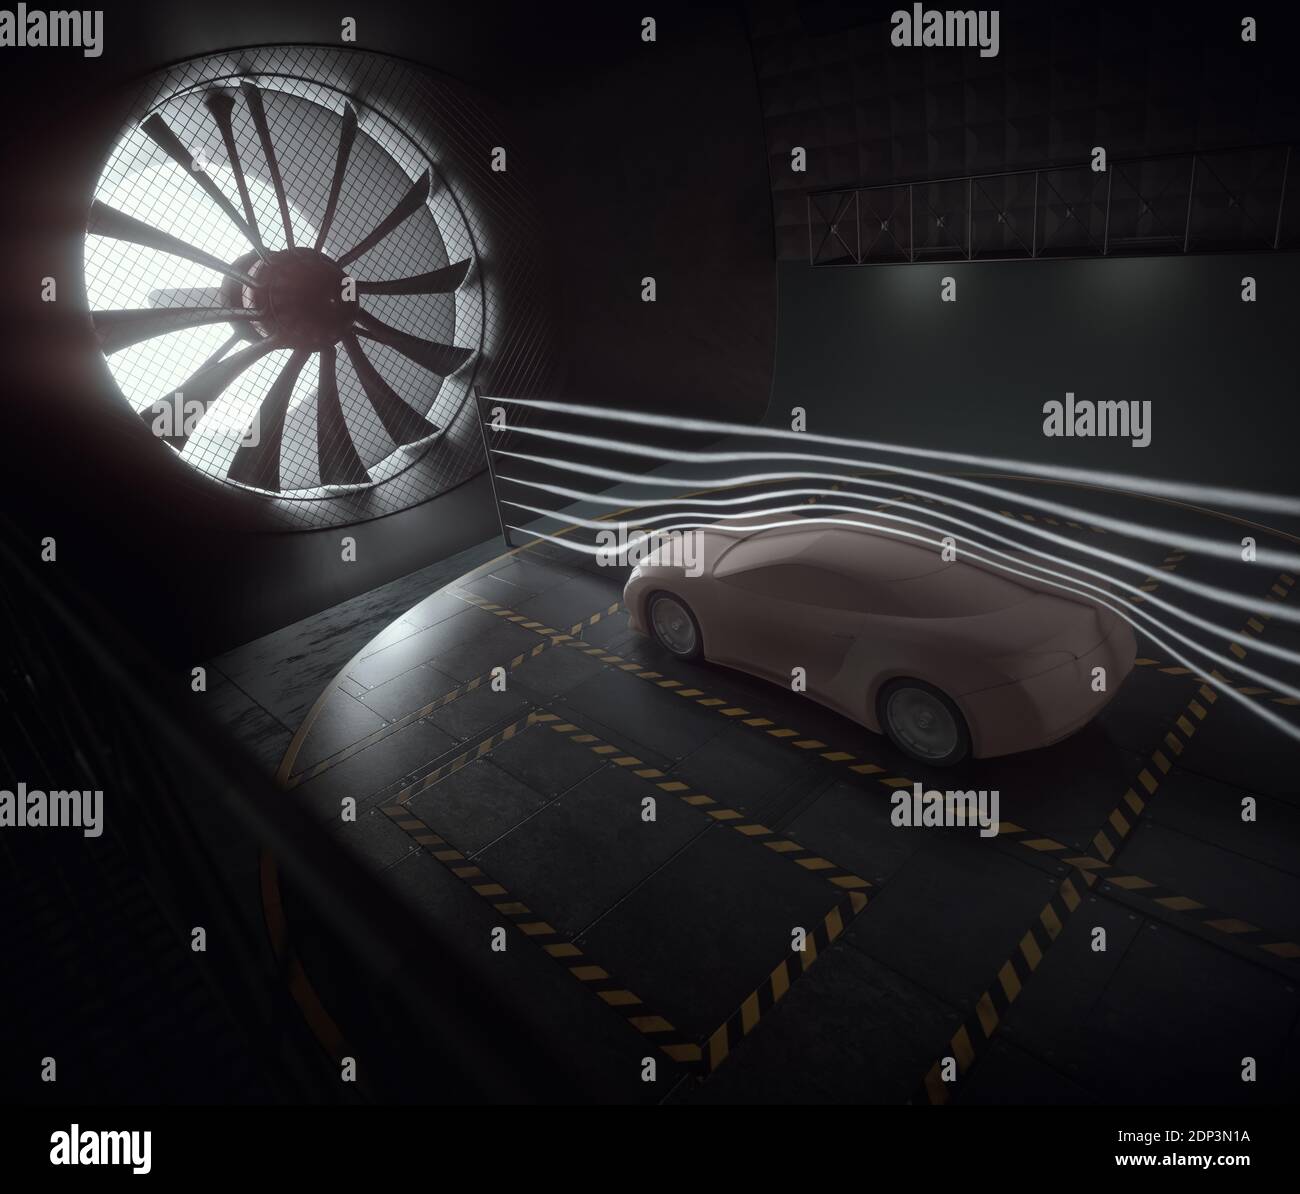 Car in wind tunnel, illustration. Stock Photo